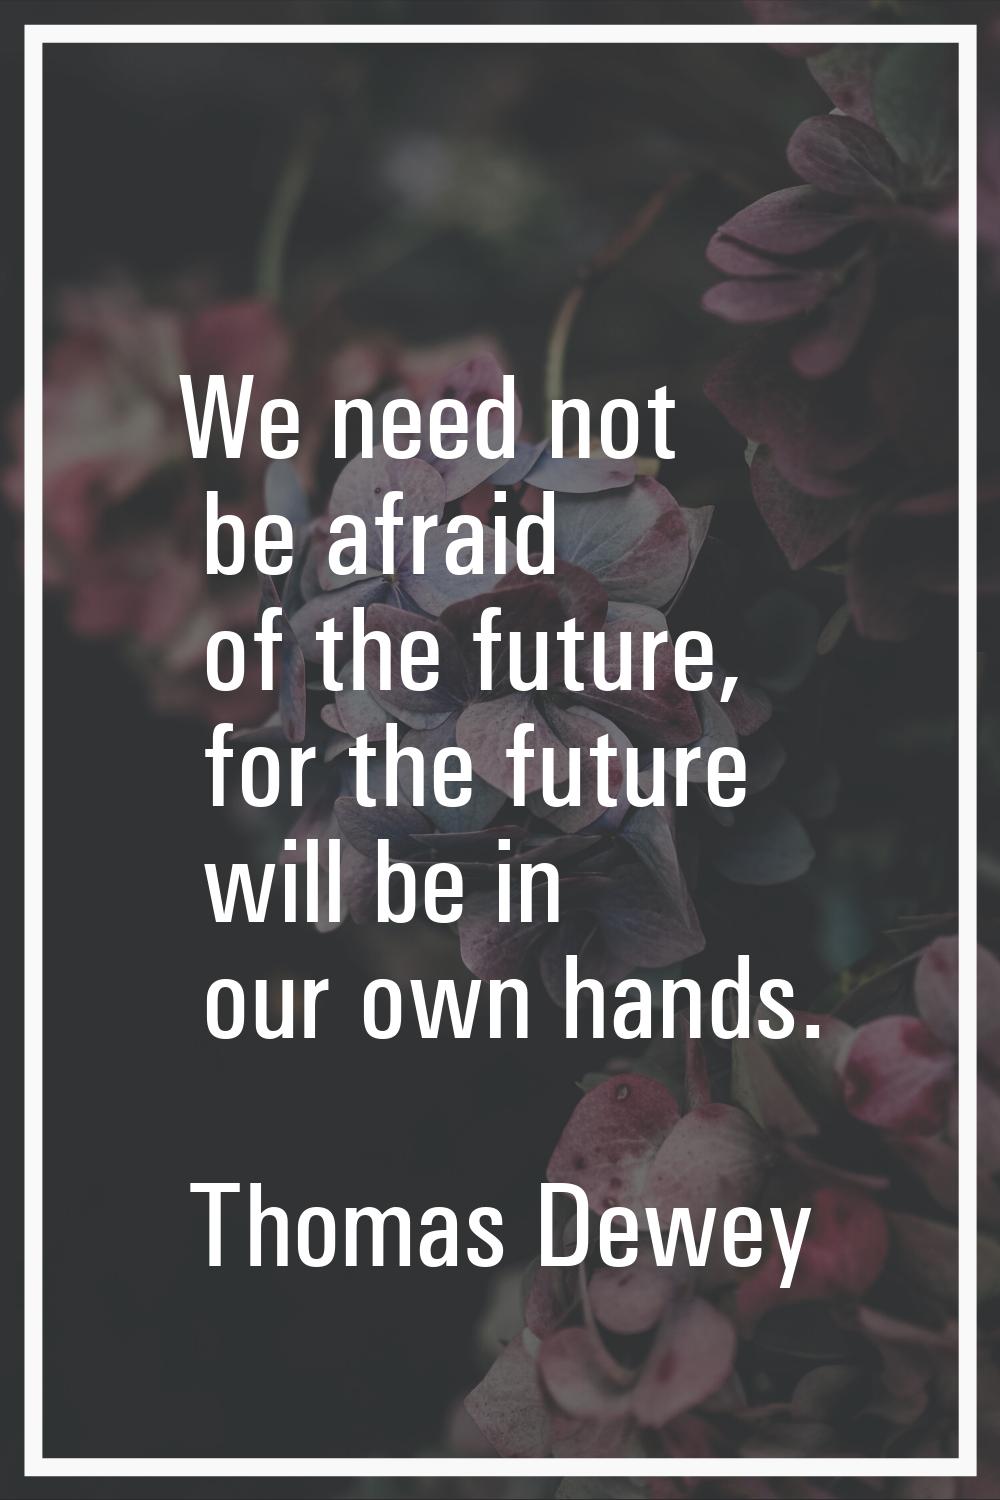 We need not be afraid of the future, for the future will be in our own hands.